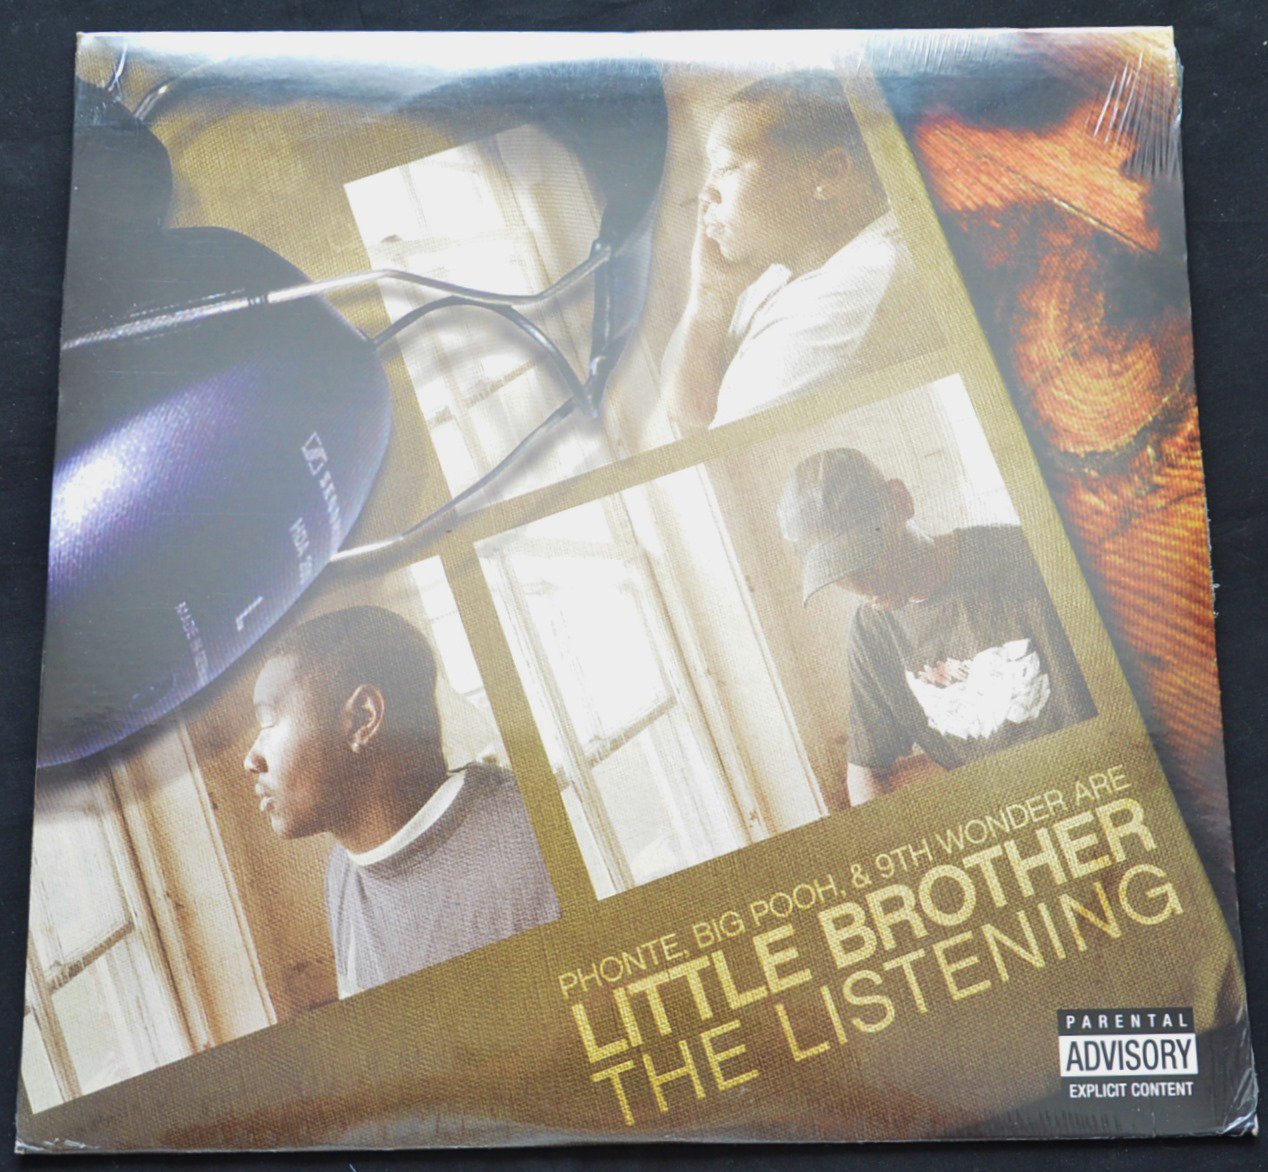 LITTLE BROTHER / THE LISTENING (2LP)